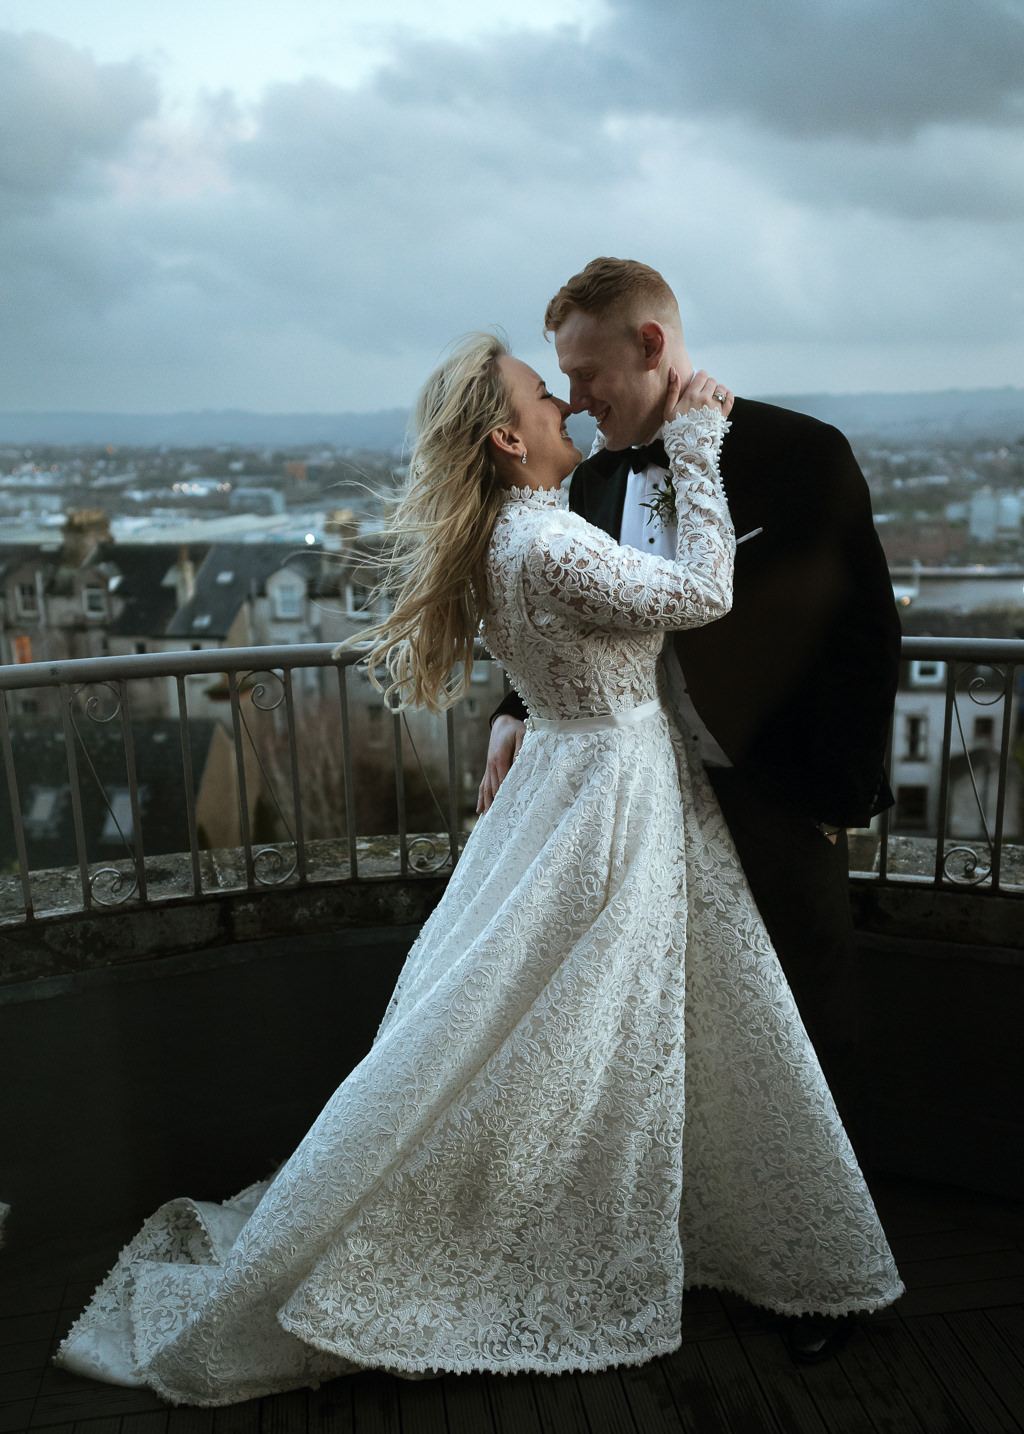 A Magical Music-Themed Wedding in Cork: Michaela & Cathal